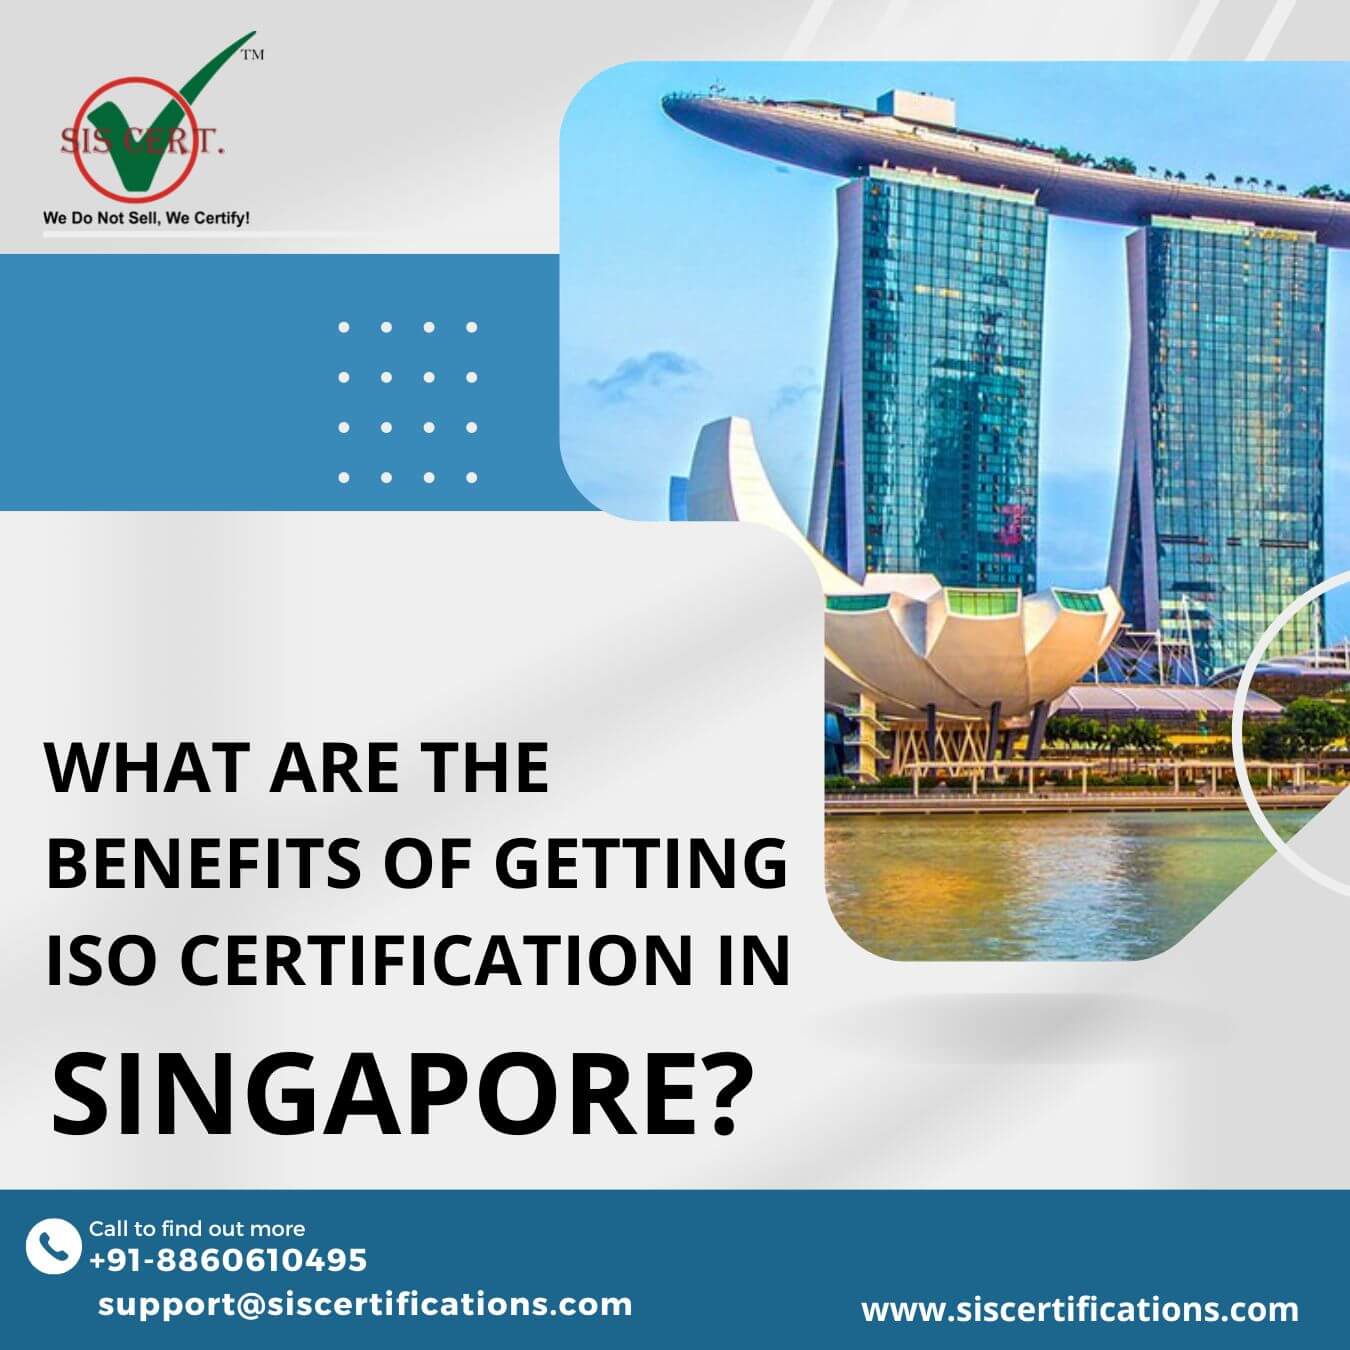 What are the Benefits of Getting ISO Certification in Singapore?